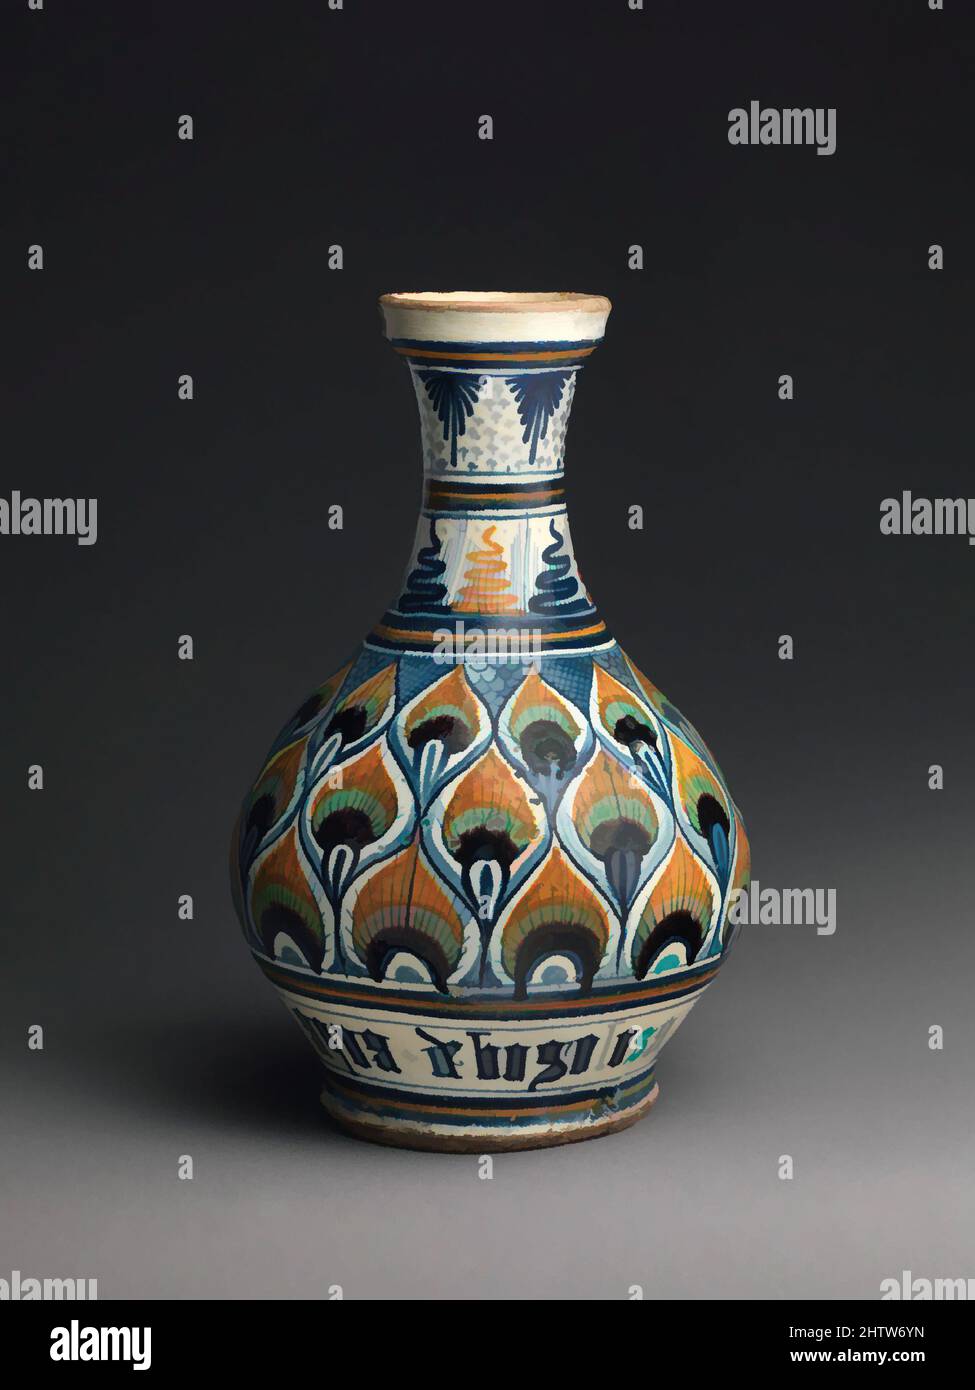 Art inspired by Pharmacy bottle, ca. 1470–1500, Italian, probably Pesaro, Maiolica (tin-glazed earthenware), Overall (confirmed): 12 1/8 × 7 9/16 × 7 9/16 in. (30.8 × 19.2 × 19.2 cm), Ceramics-Pottery, Vessels of this shape, with long, narrow necks, were designed to hold liquid, Classic works modernized by Artotop with a splash of modernity. Shapes, color and value, eye-catching visual impact on art. Emotions through freedom of artworks in a contemporary way. A timeless message pursuing a wildly creative new direction. Artists turning to the digital medium and creating the Artotop NFT Stock Photo